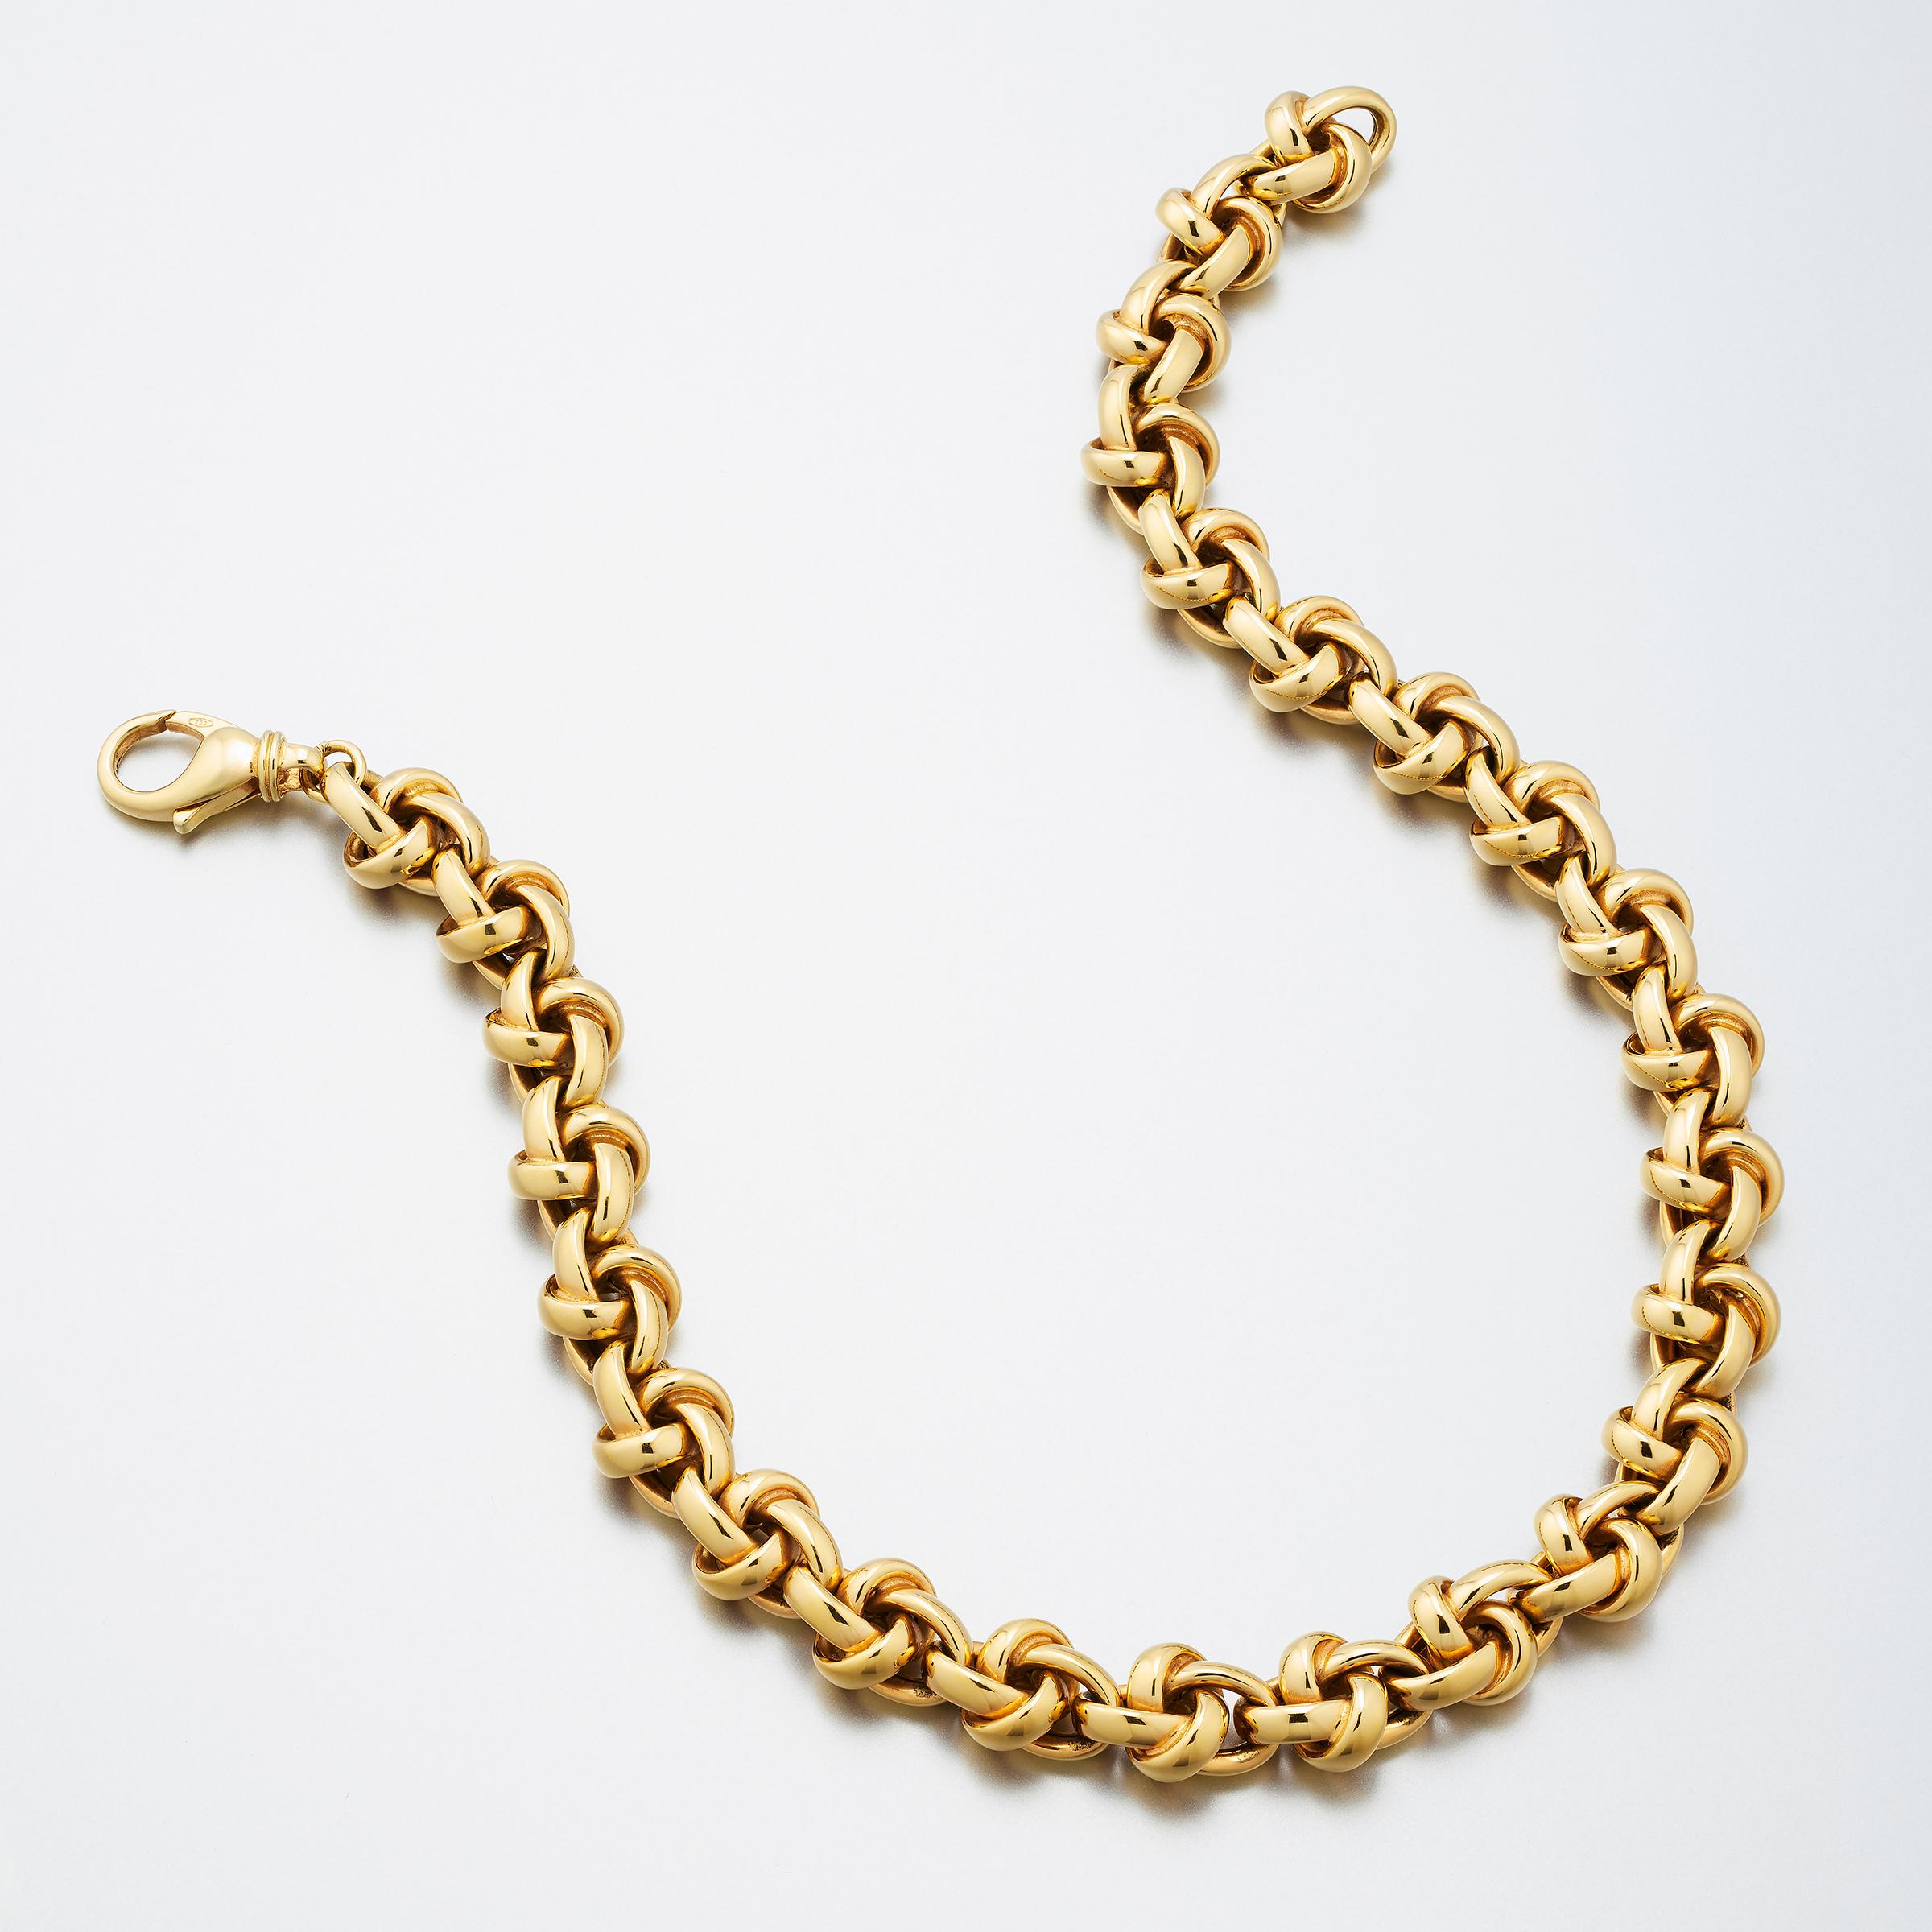 Splendid vintage fancy link necklace in radiant 18 karat yellow gold. The necklace design features a series of interlocked twisting ellipses which combine to create an impression of highly-stylized rope knots. Links are masterfully crafted and